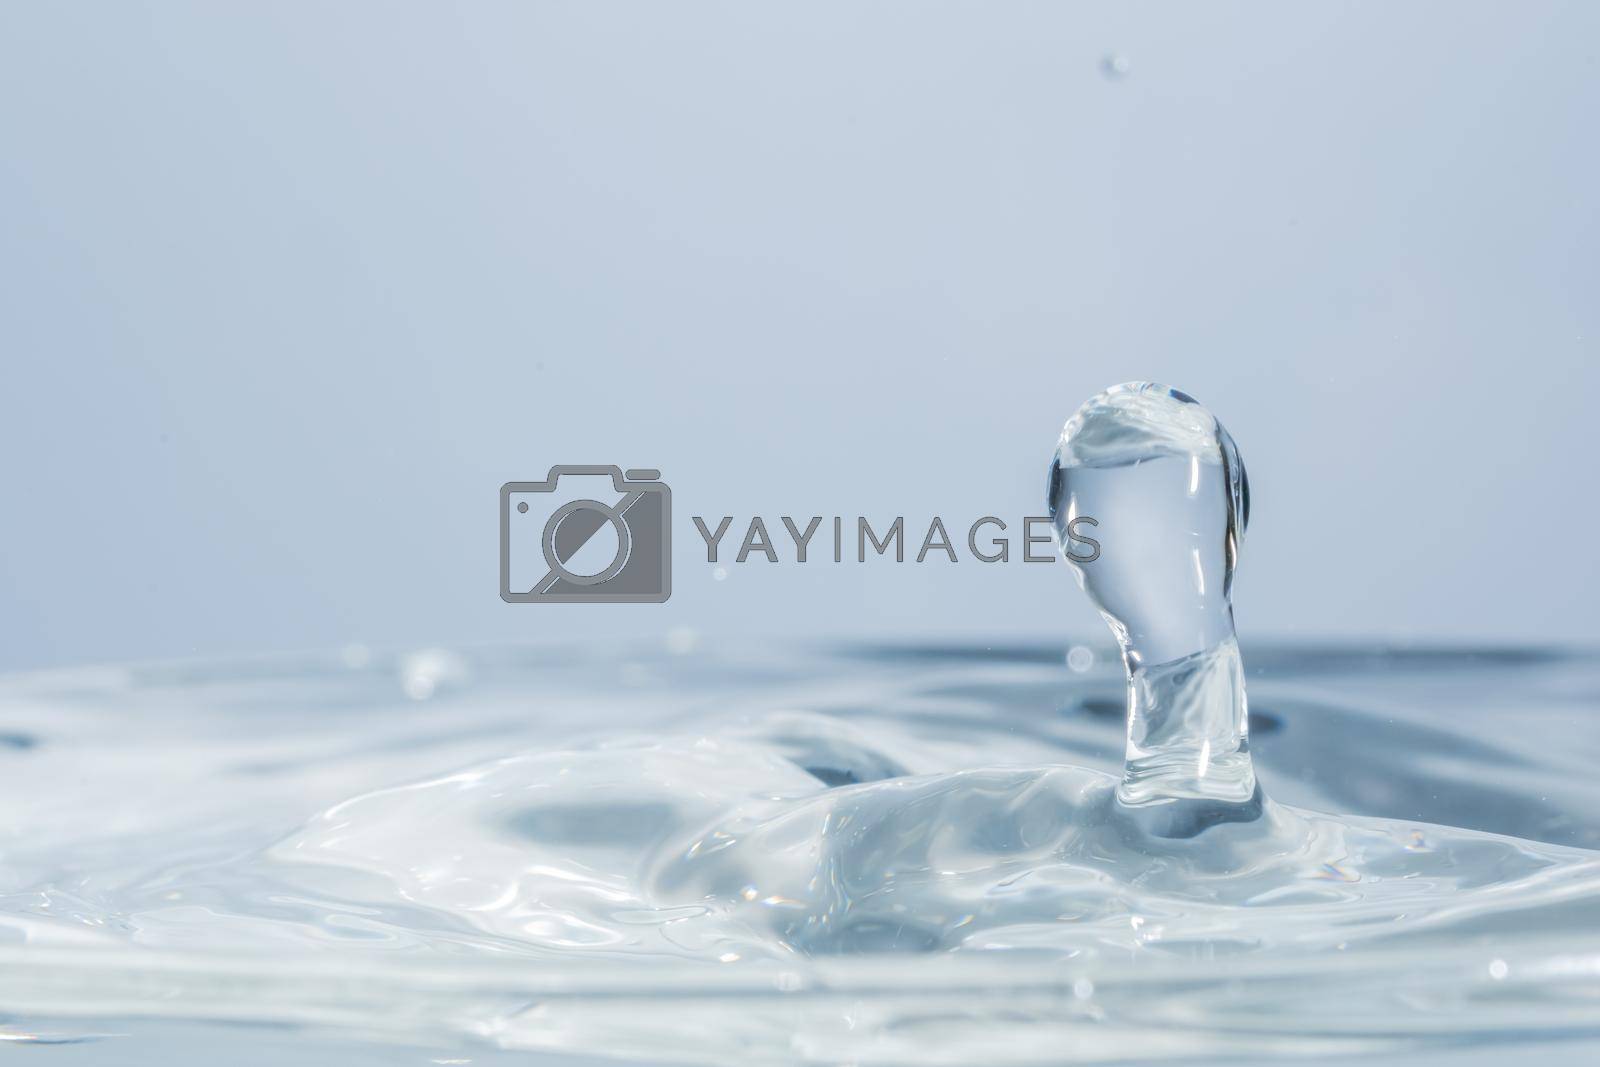 Royalty free image of Waves and water drops by yayimage